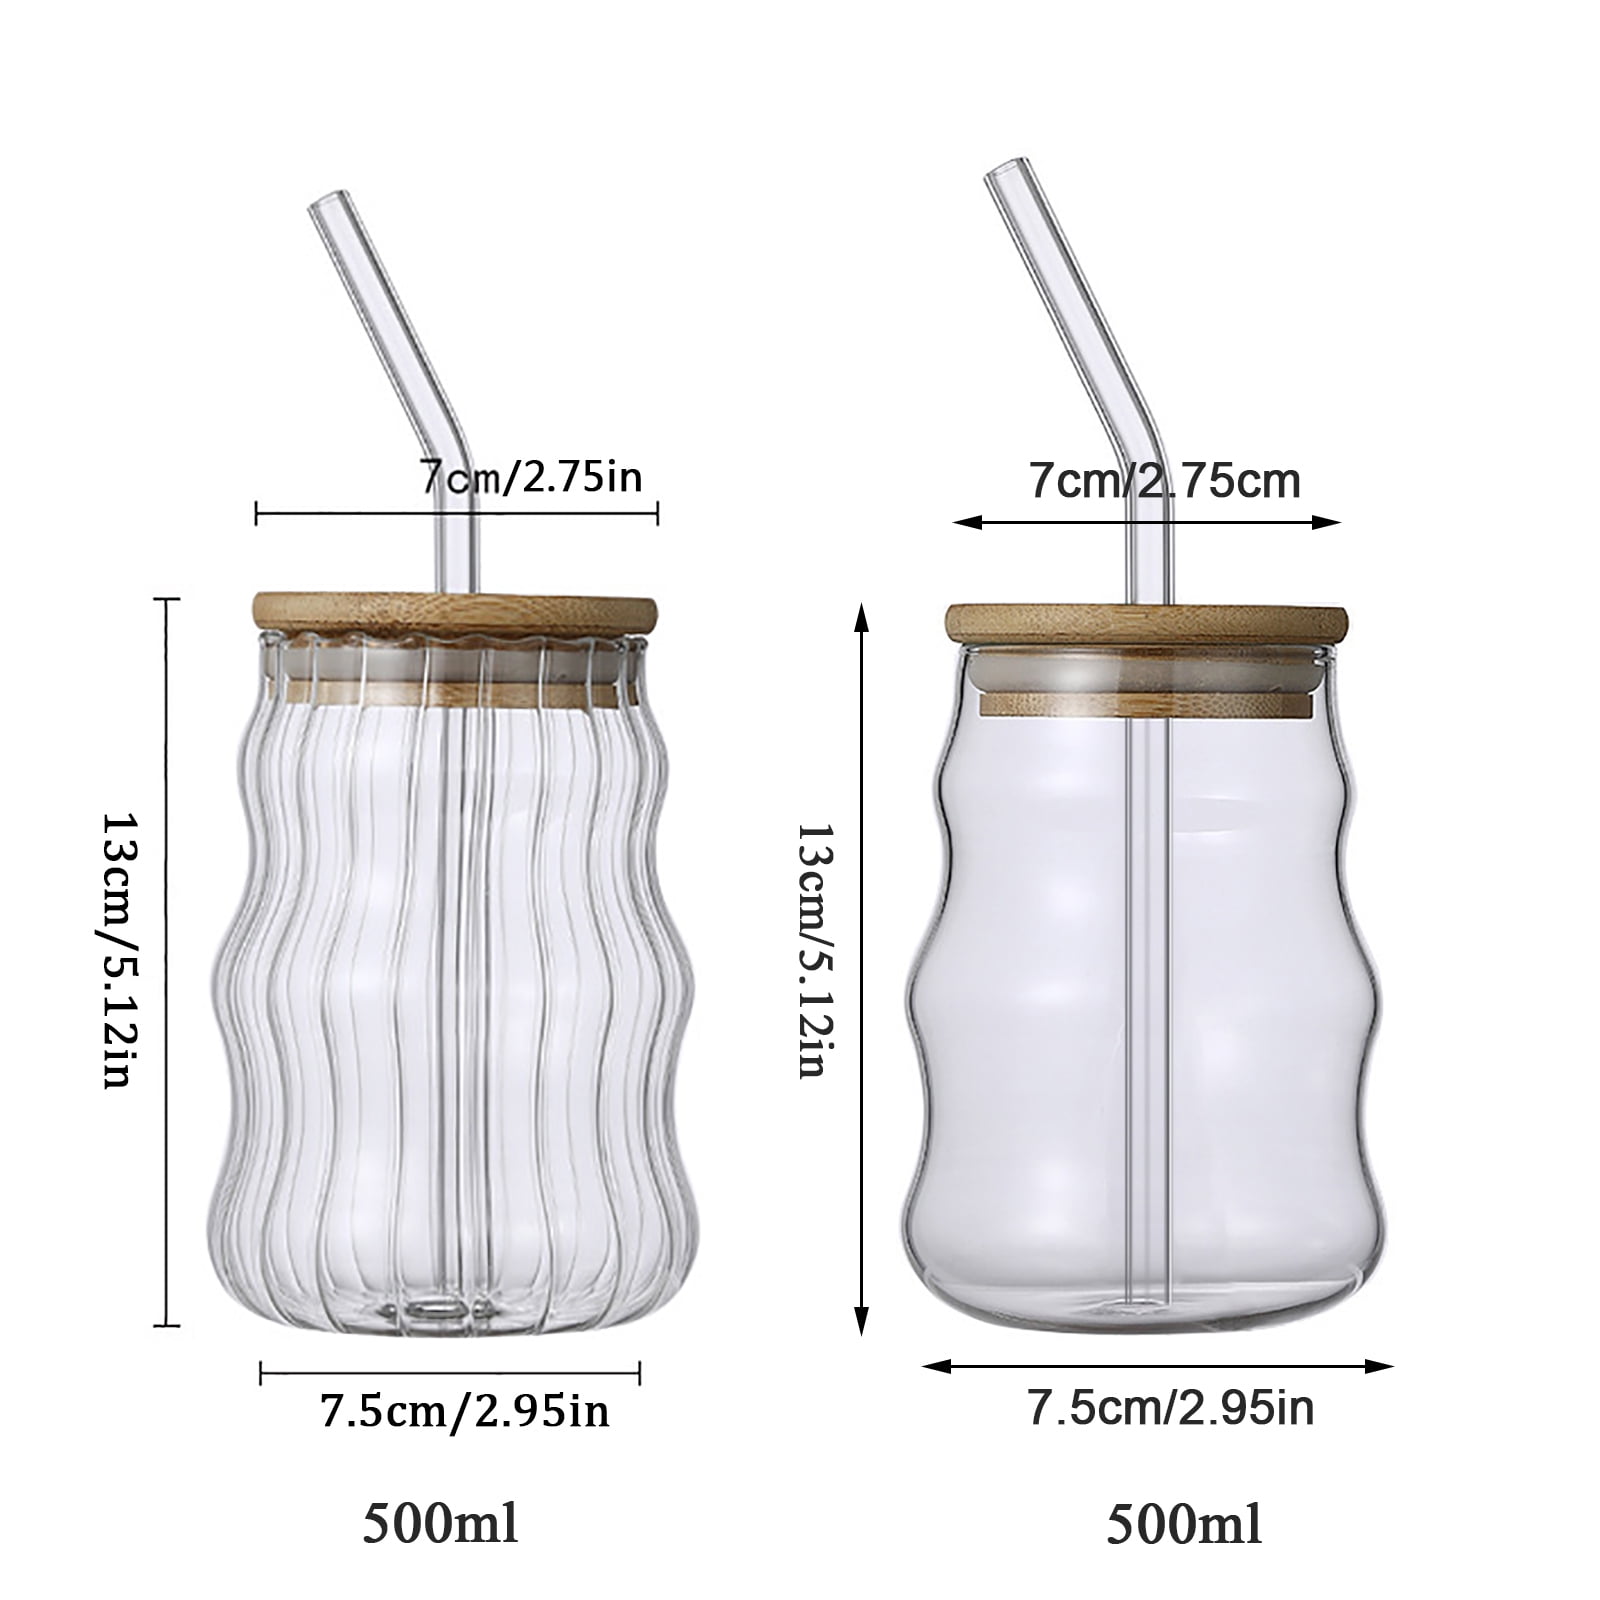 Elegant Water Cup for Summer,Wave Shaped Glass Cups with Lids and Straws,Milk  Tea Coffee Mug,Cold Drinks Tumbler,Clear Mousse Pudding Container,Fruit  Yogurt Cup,17 oz 